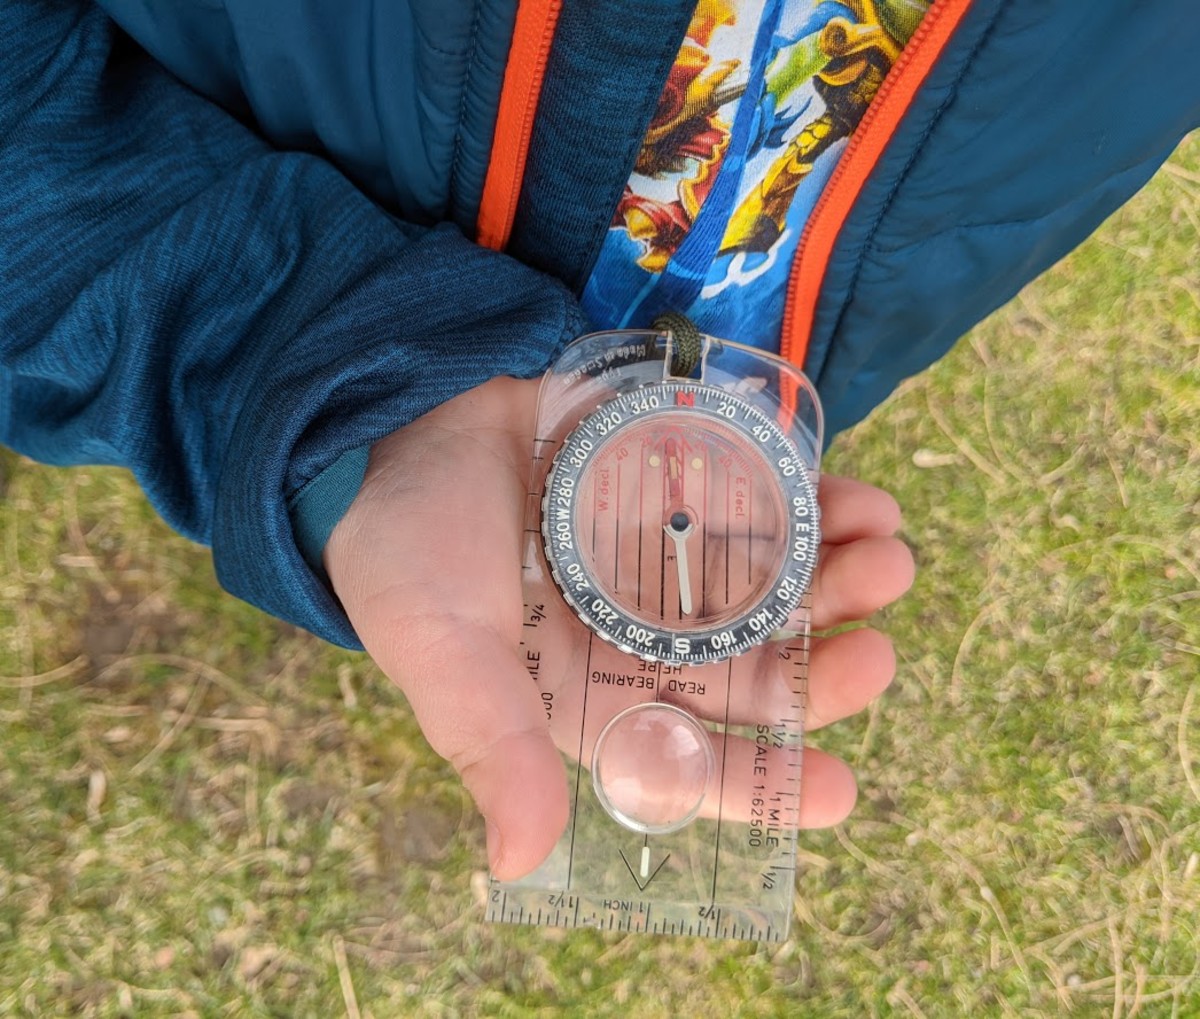 Following a compass bearing is an outdoor skill and an excellent exercise with geometry.  